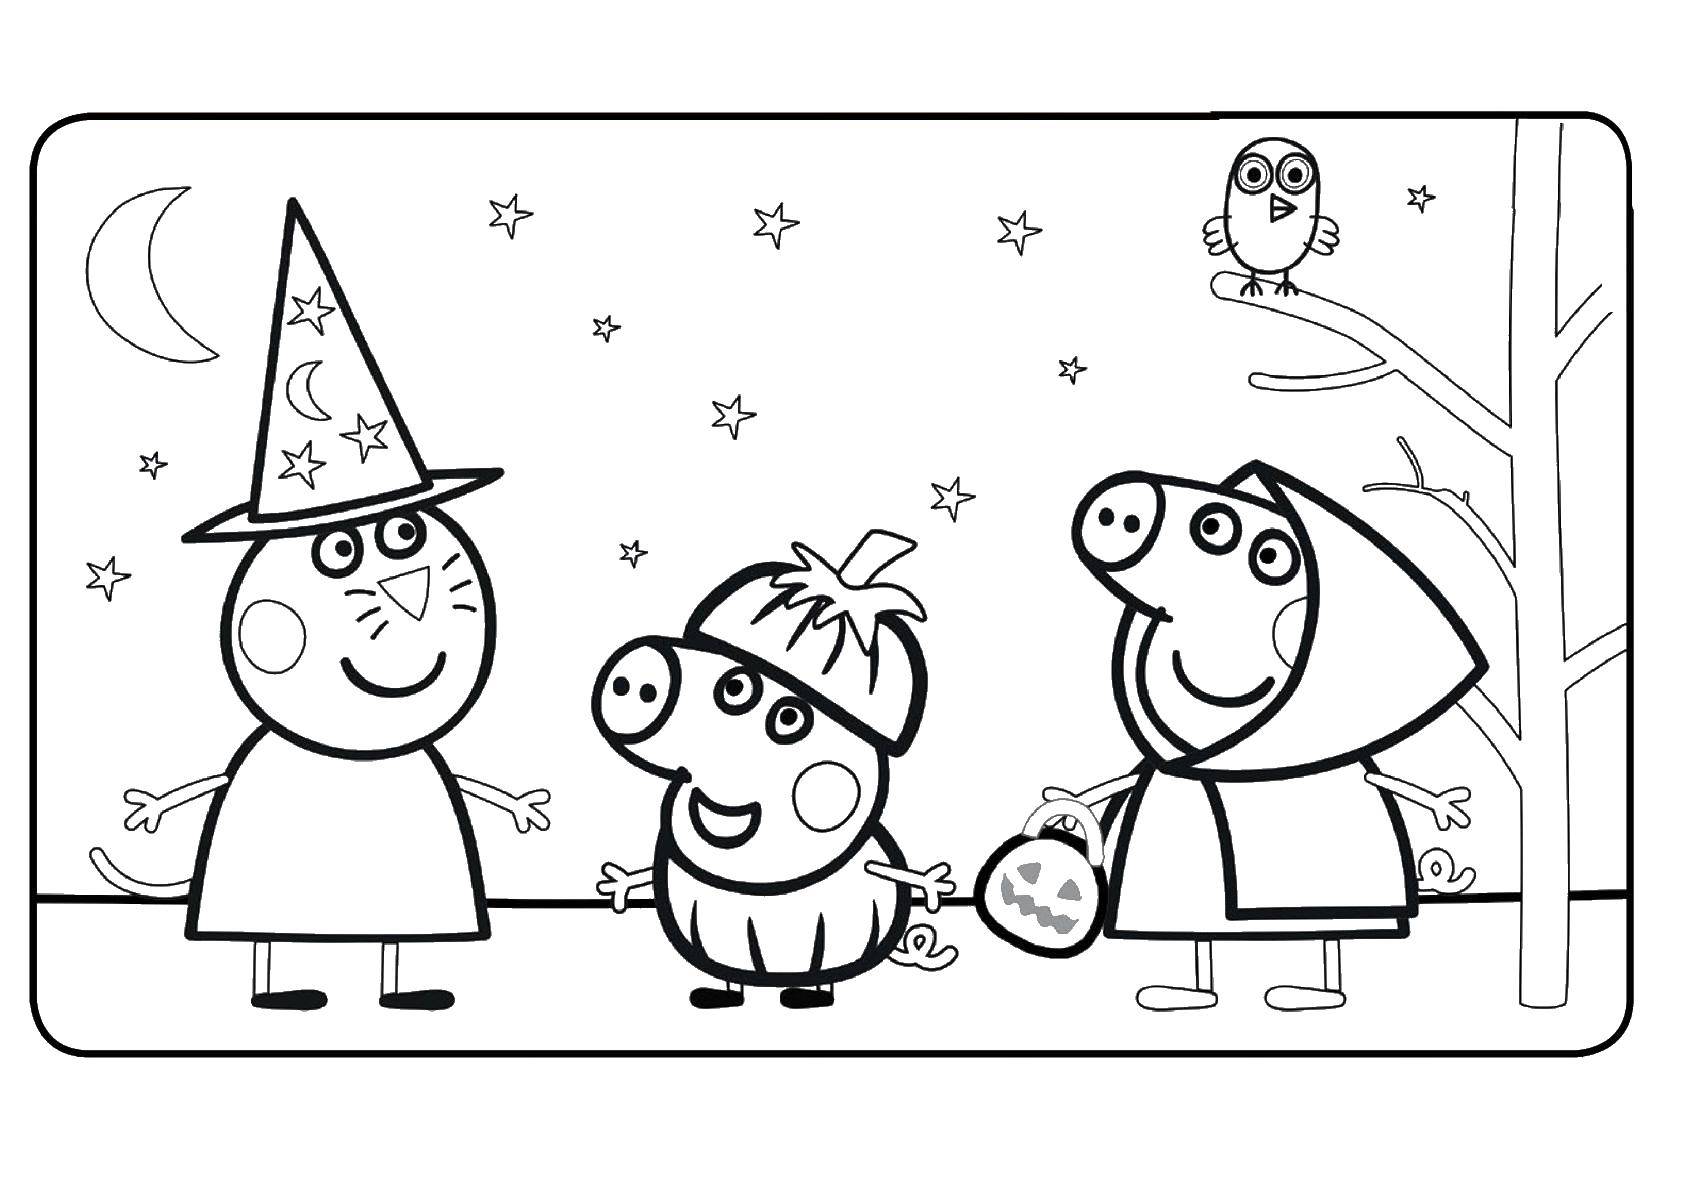 peppa pig halloween coloring pages